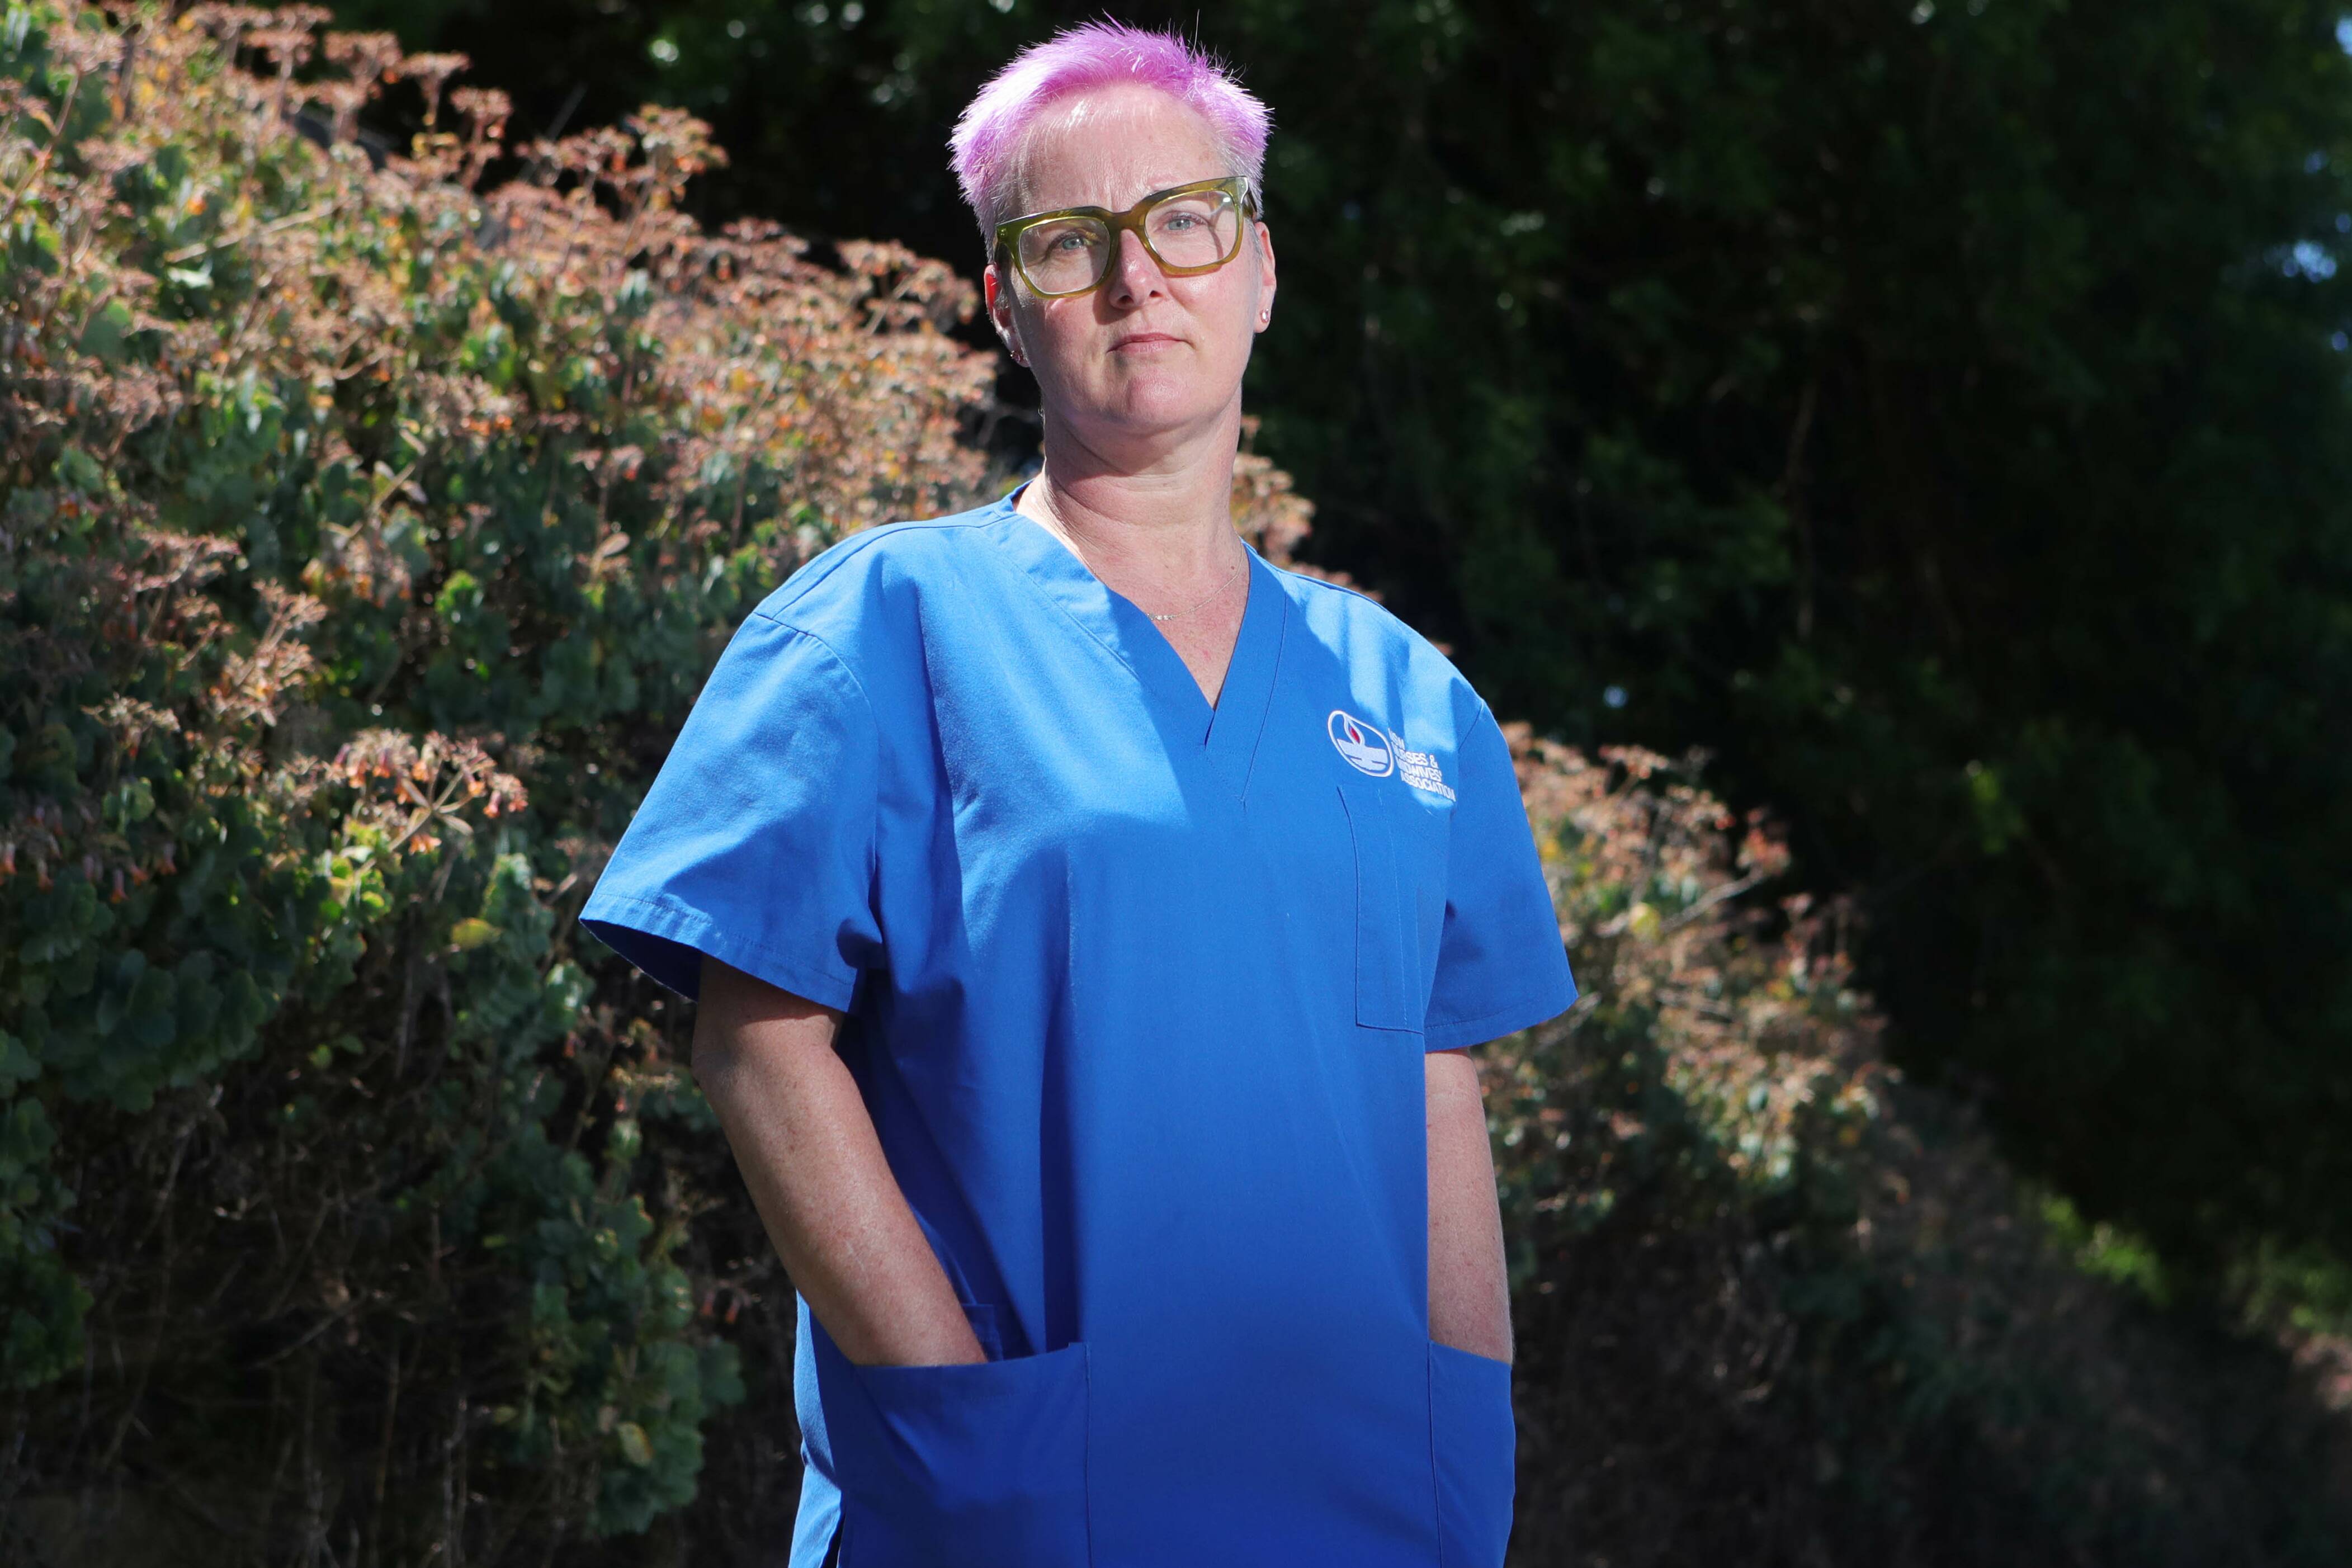 I'm a nurse - people are wowed by my transformation from scrubs to